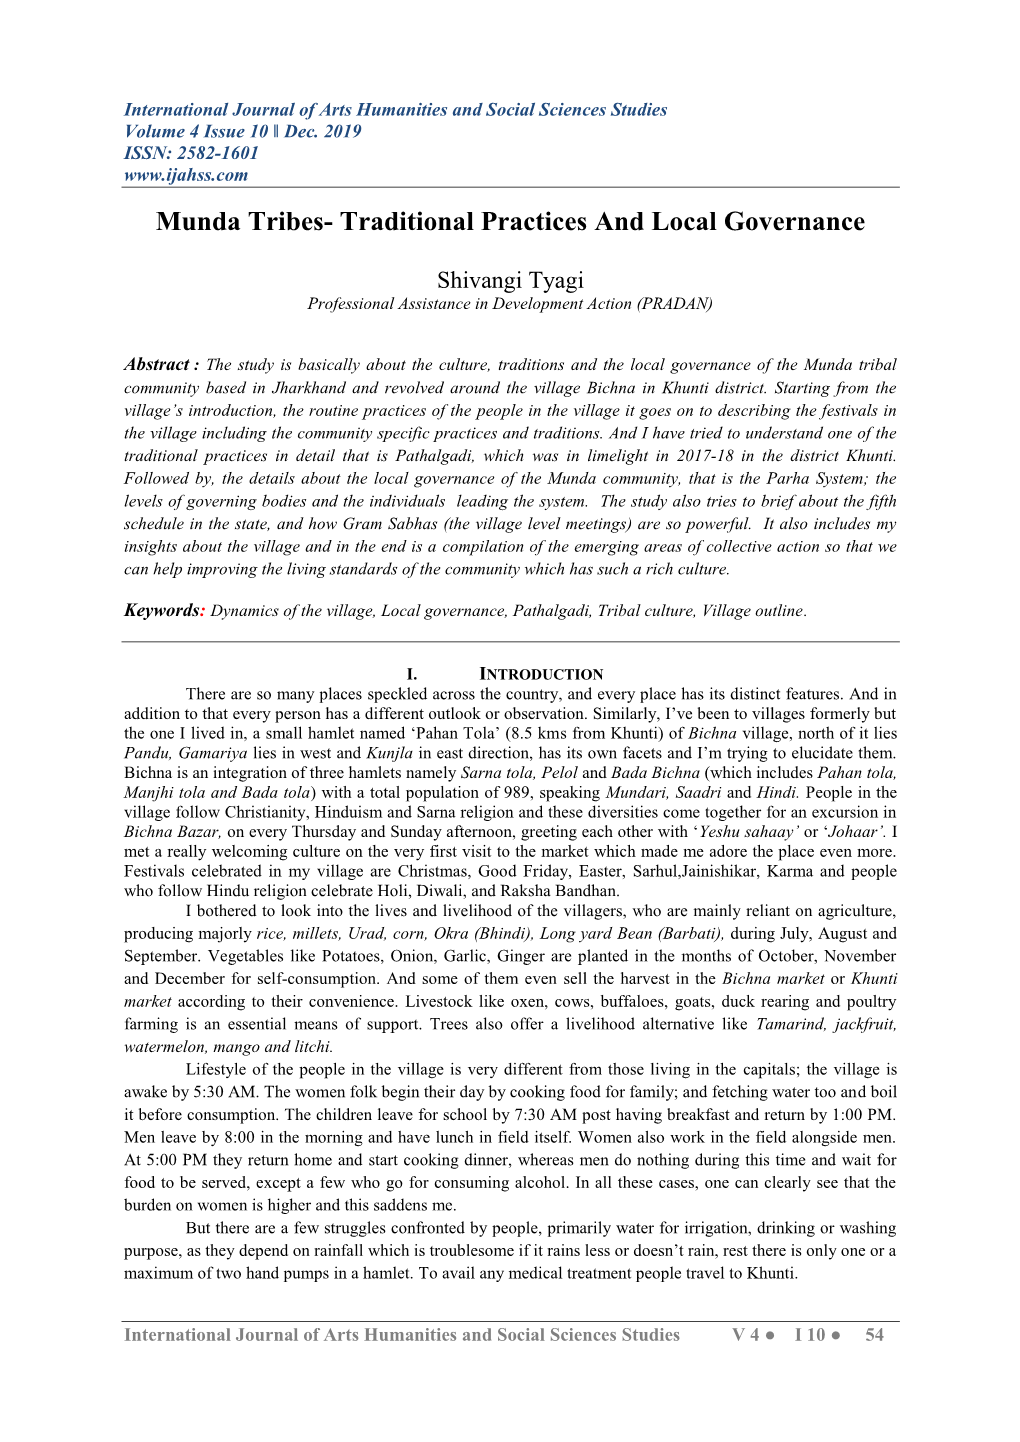 Munda Tribes- Traditional Practices and Local Governance